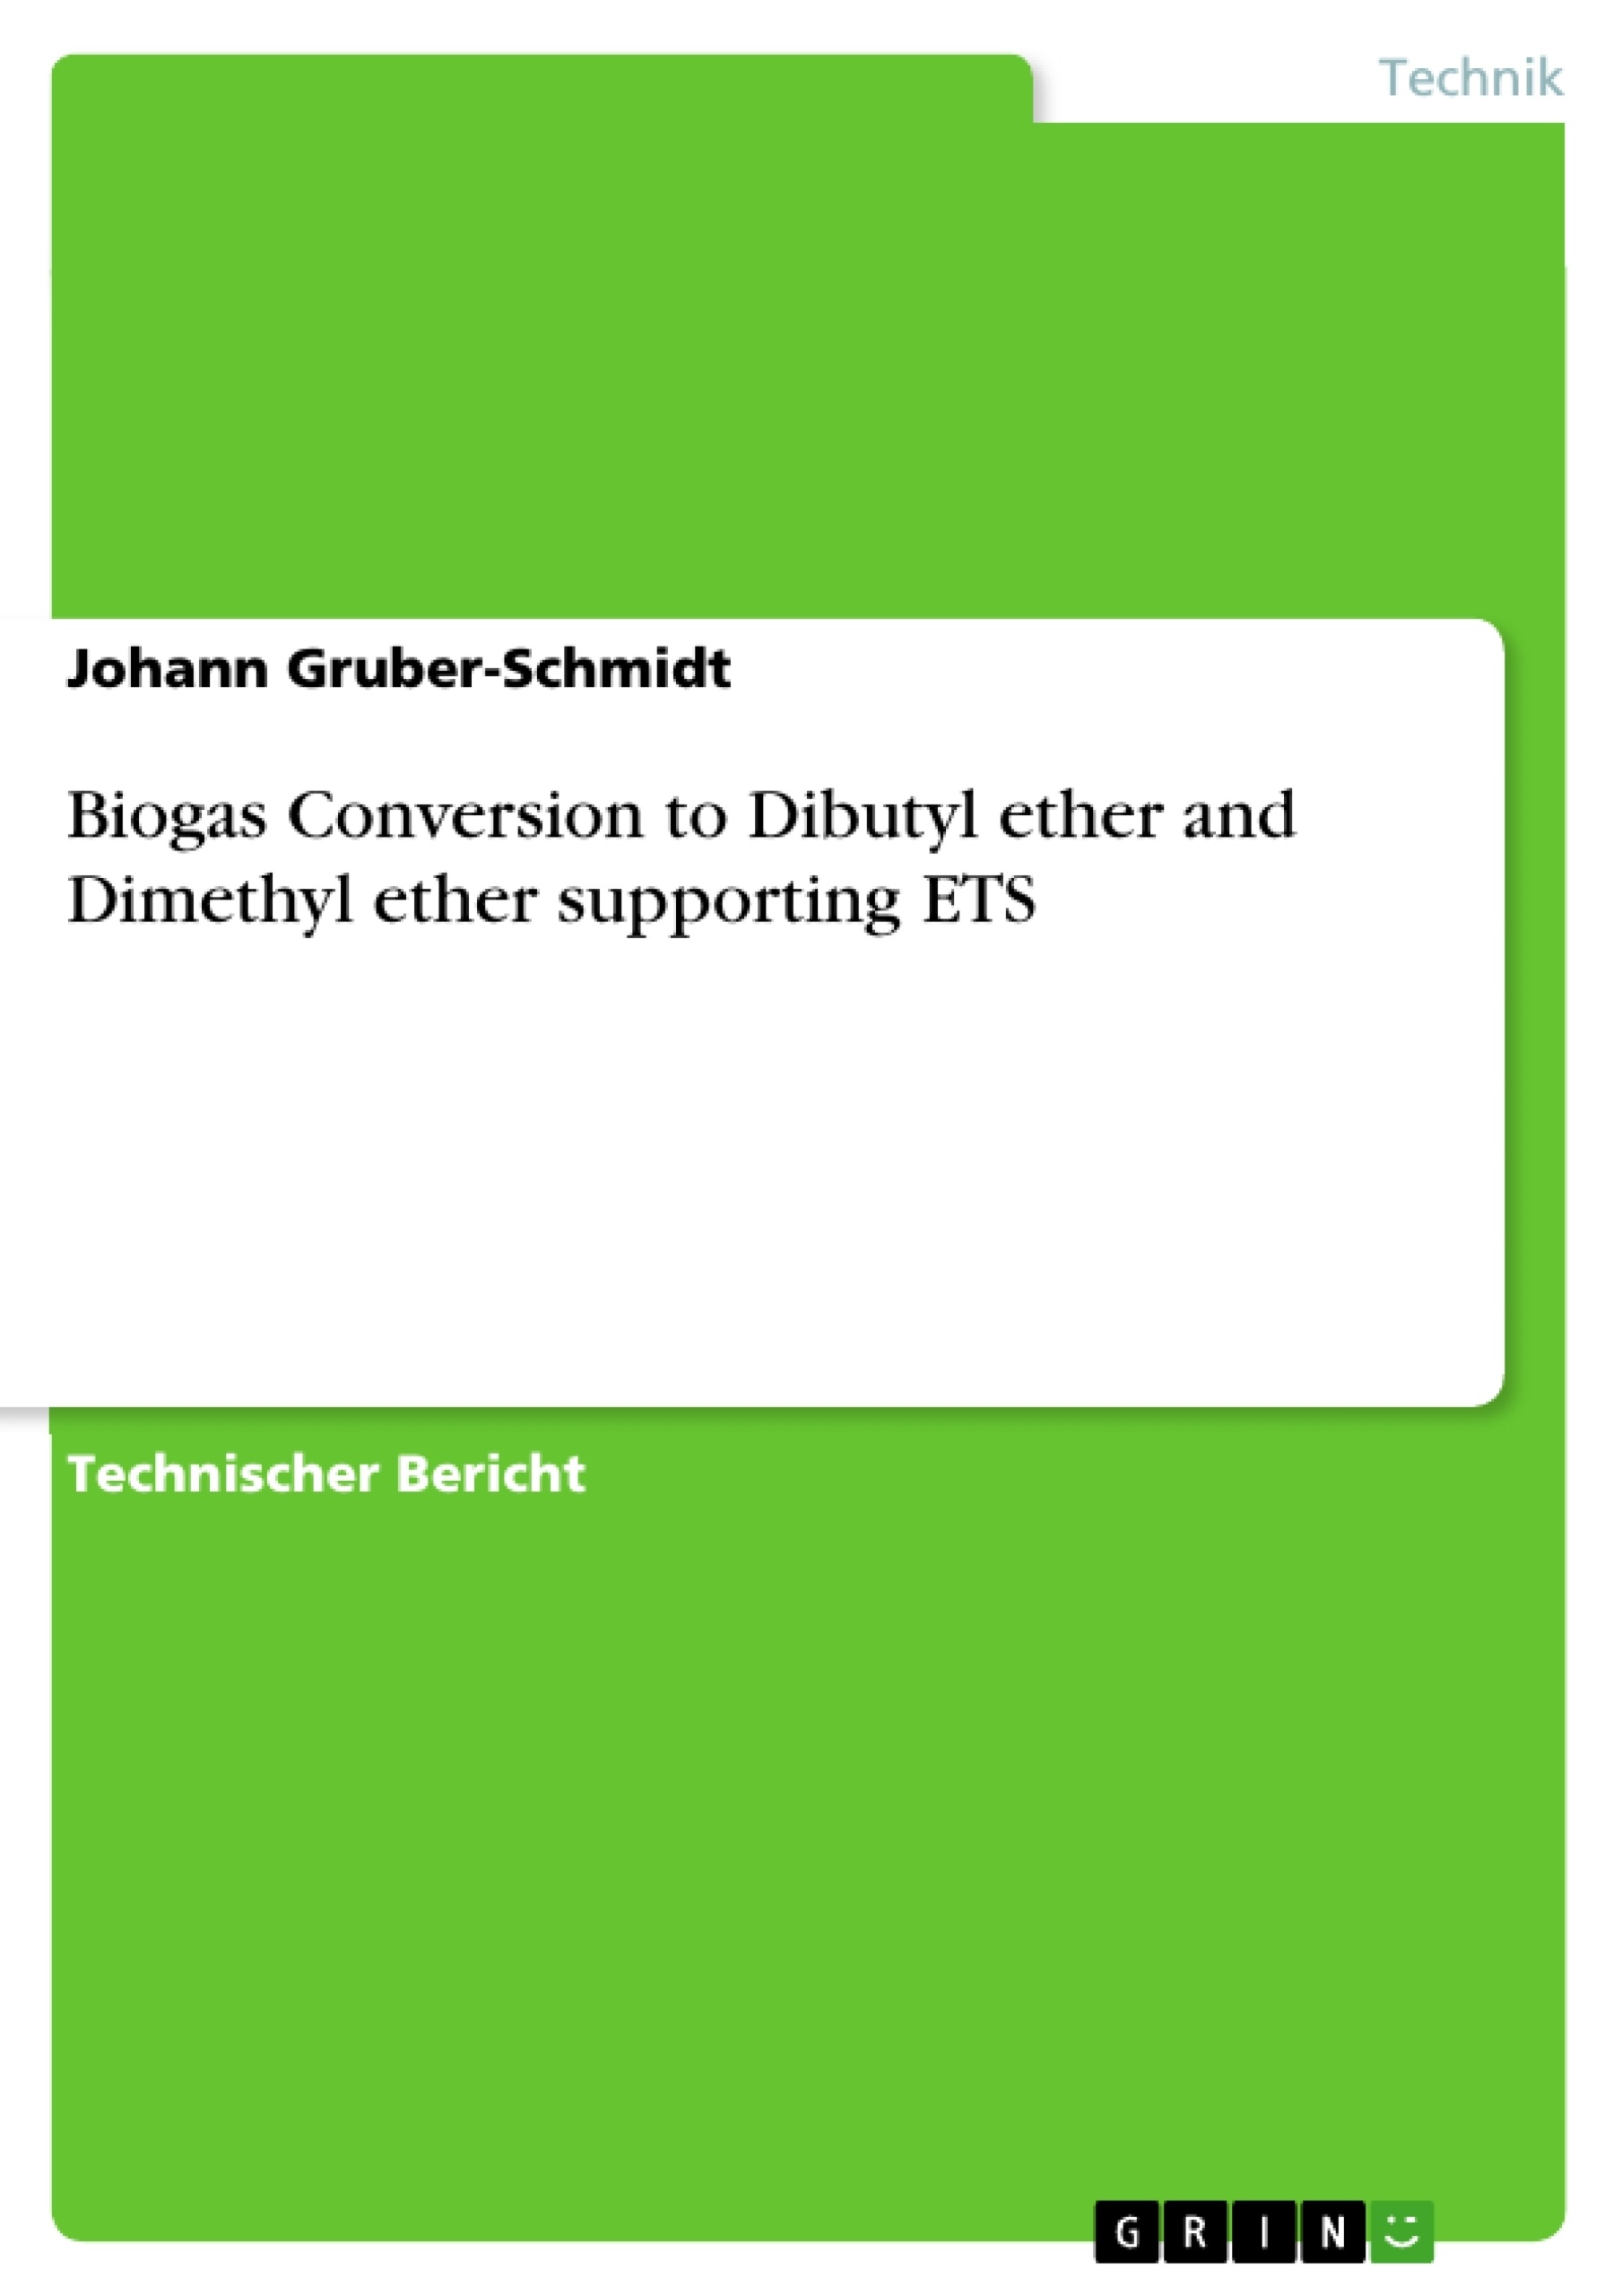 Titel: Biogas Conversion to Dibutyl ether and Dimethyl ether supporting ETS